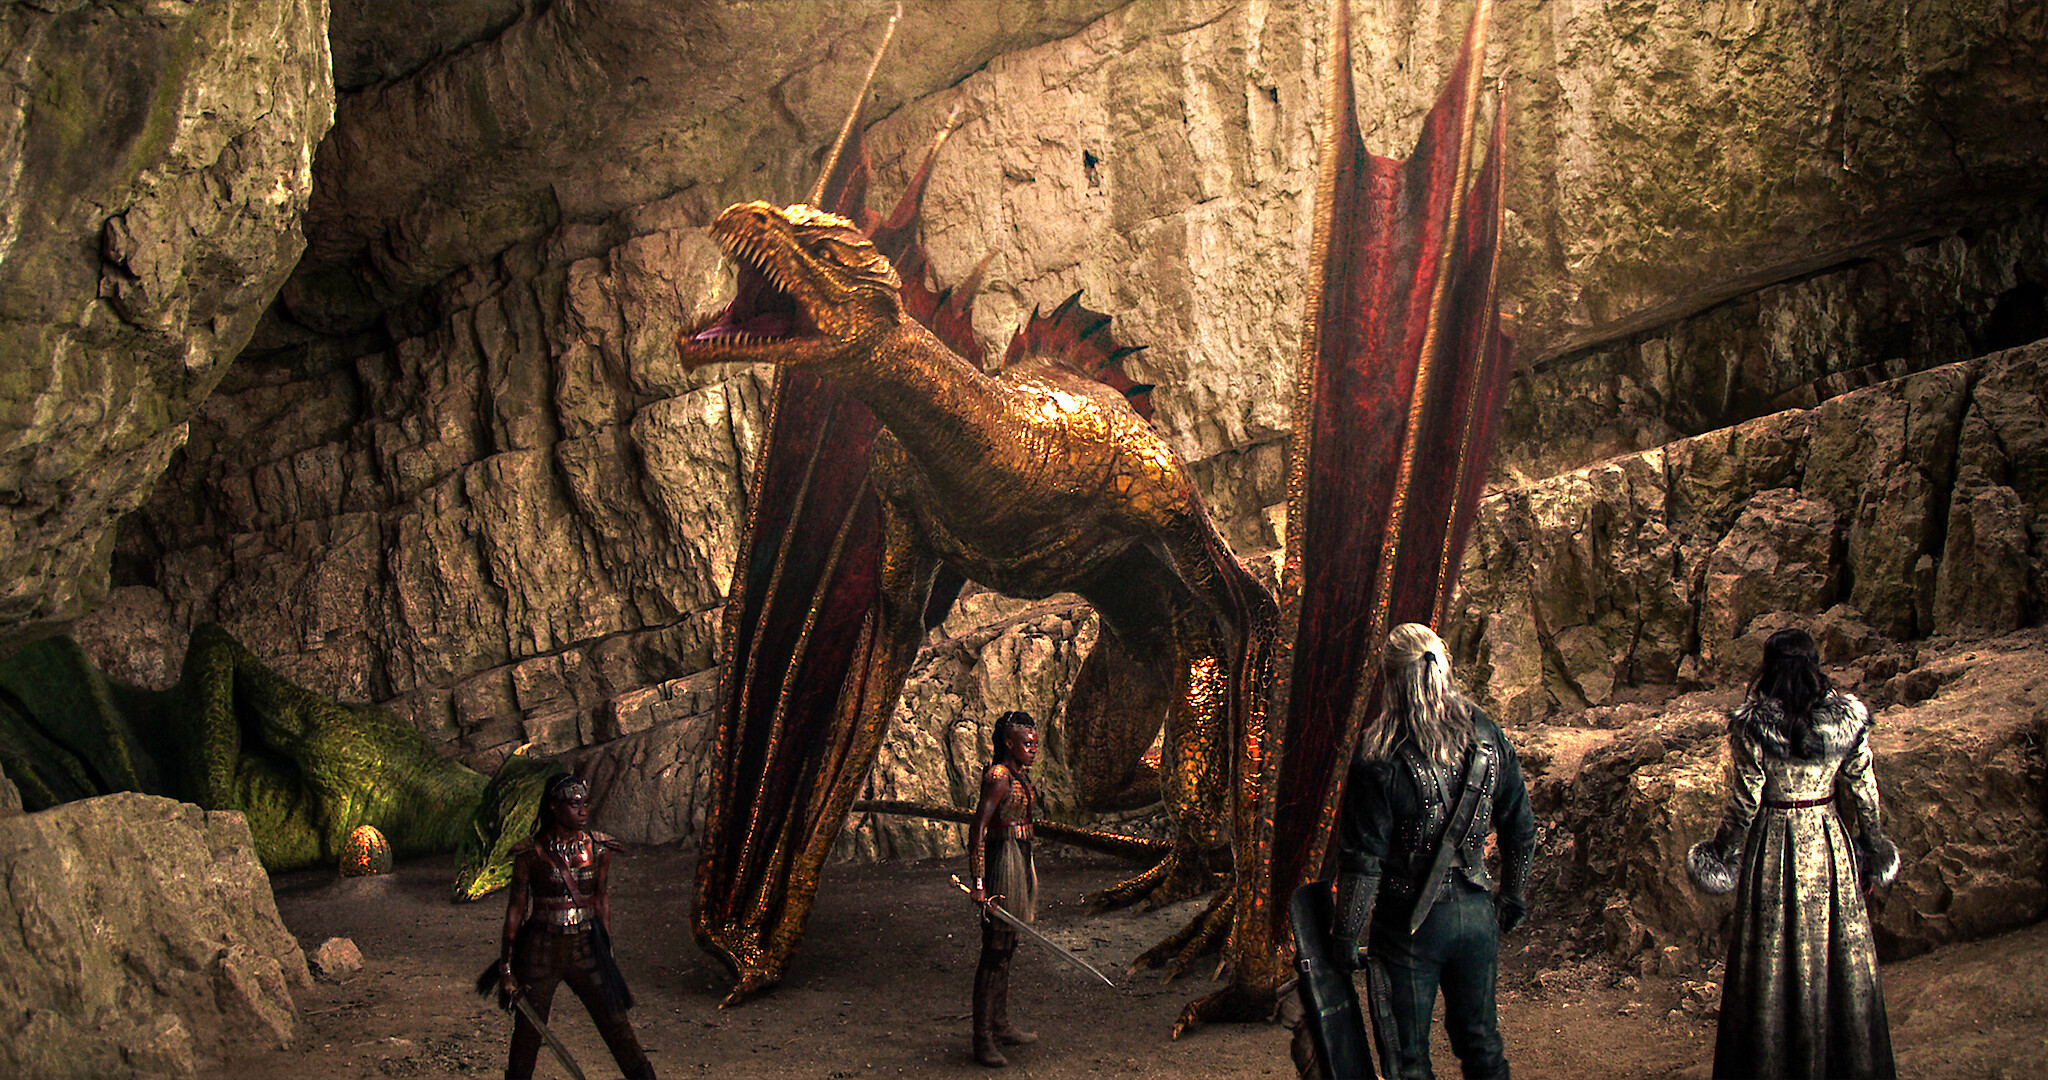 House Of The Dragon Season 2 Teaser 2024: New Dragons and Game Of Thrones  Easter Eggs 